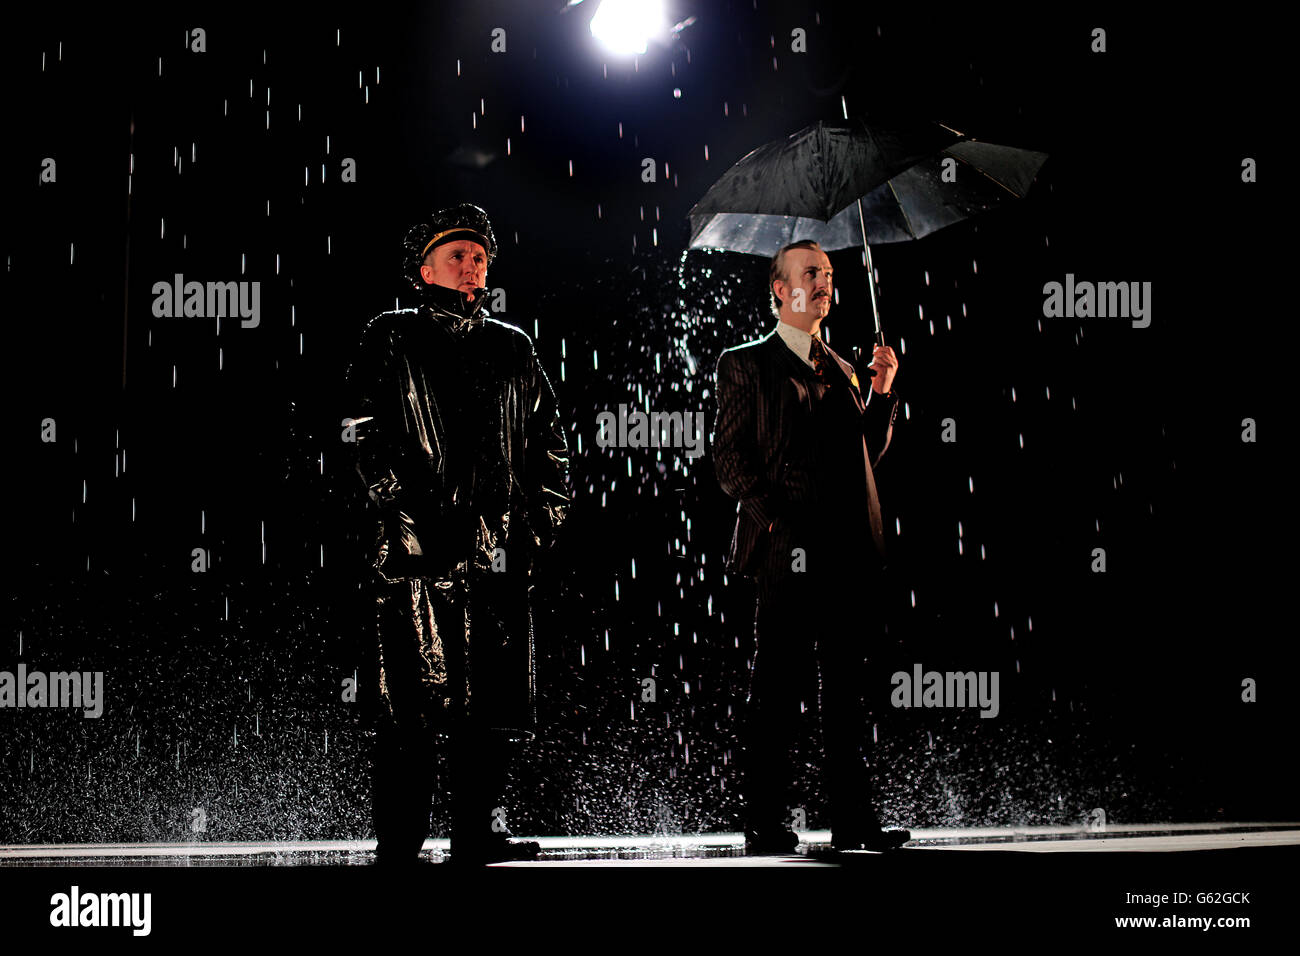 Actors Gary Lydon playing a New York Police Chief (left) and Decaln Conlon as the lead Gangster during a rain shower on stage at the Abbey Theatre in Dublin during rehearsals for Drum Belly, a new play by writer Richard Dormer which has it's world premiere tomorrow night. Stock Photo